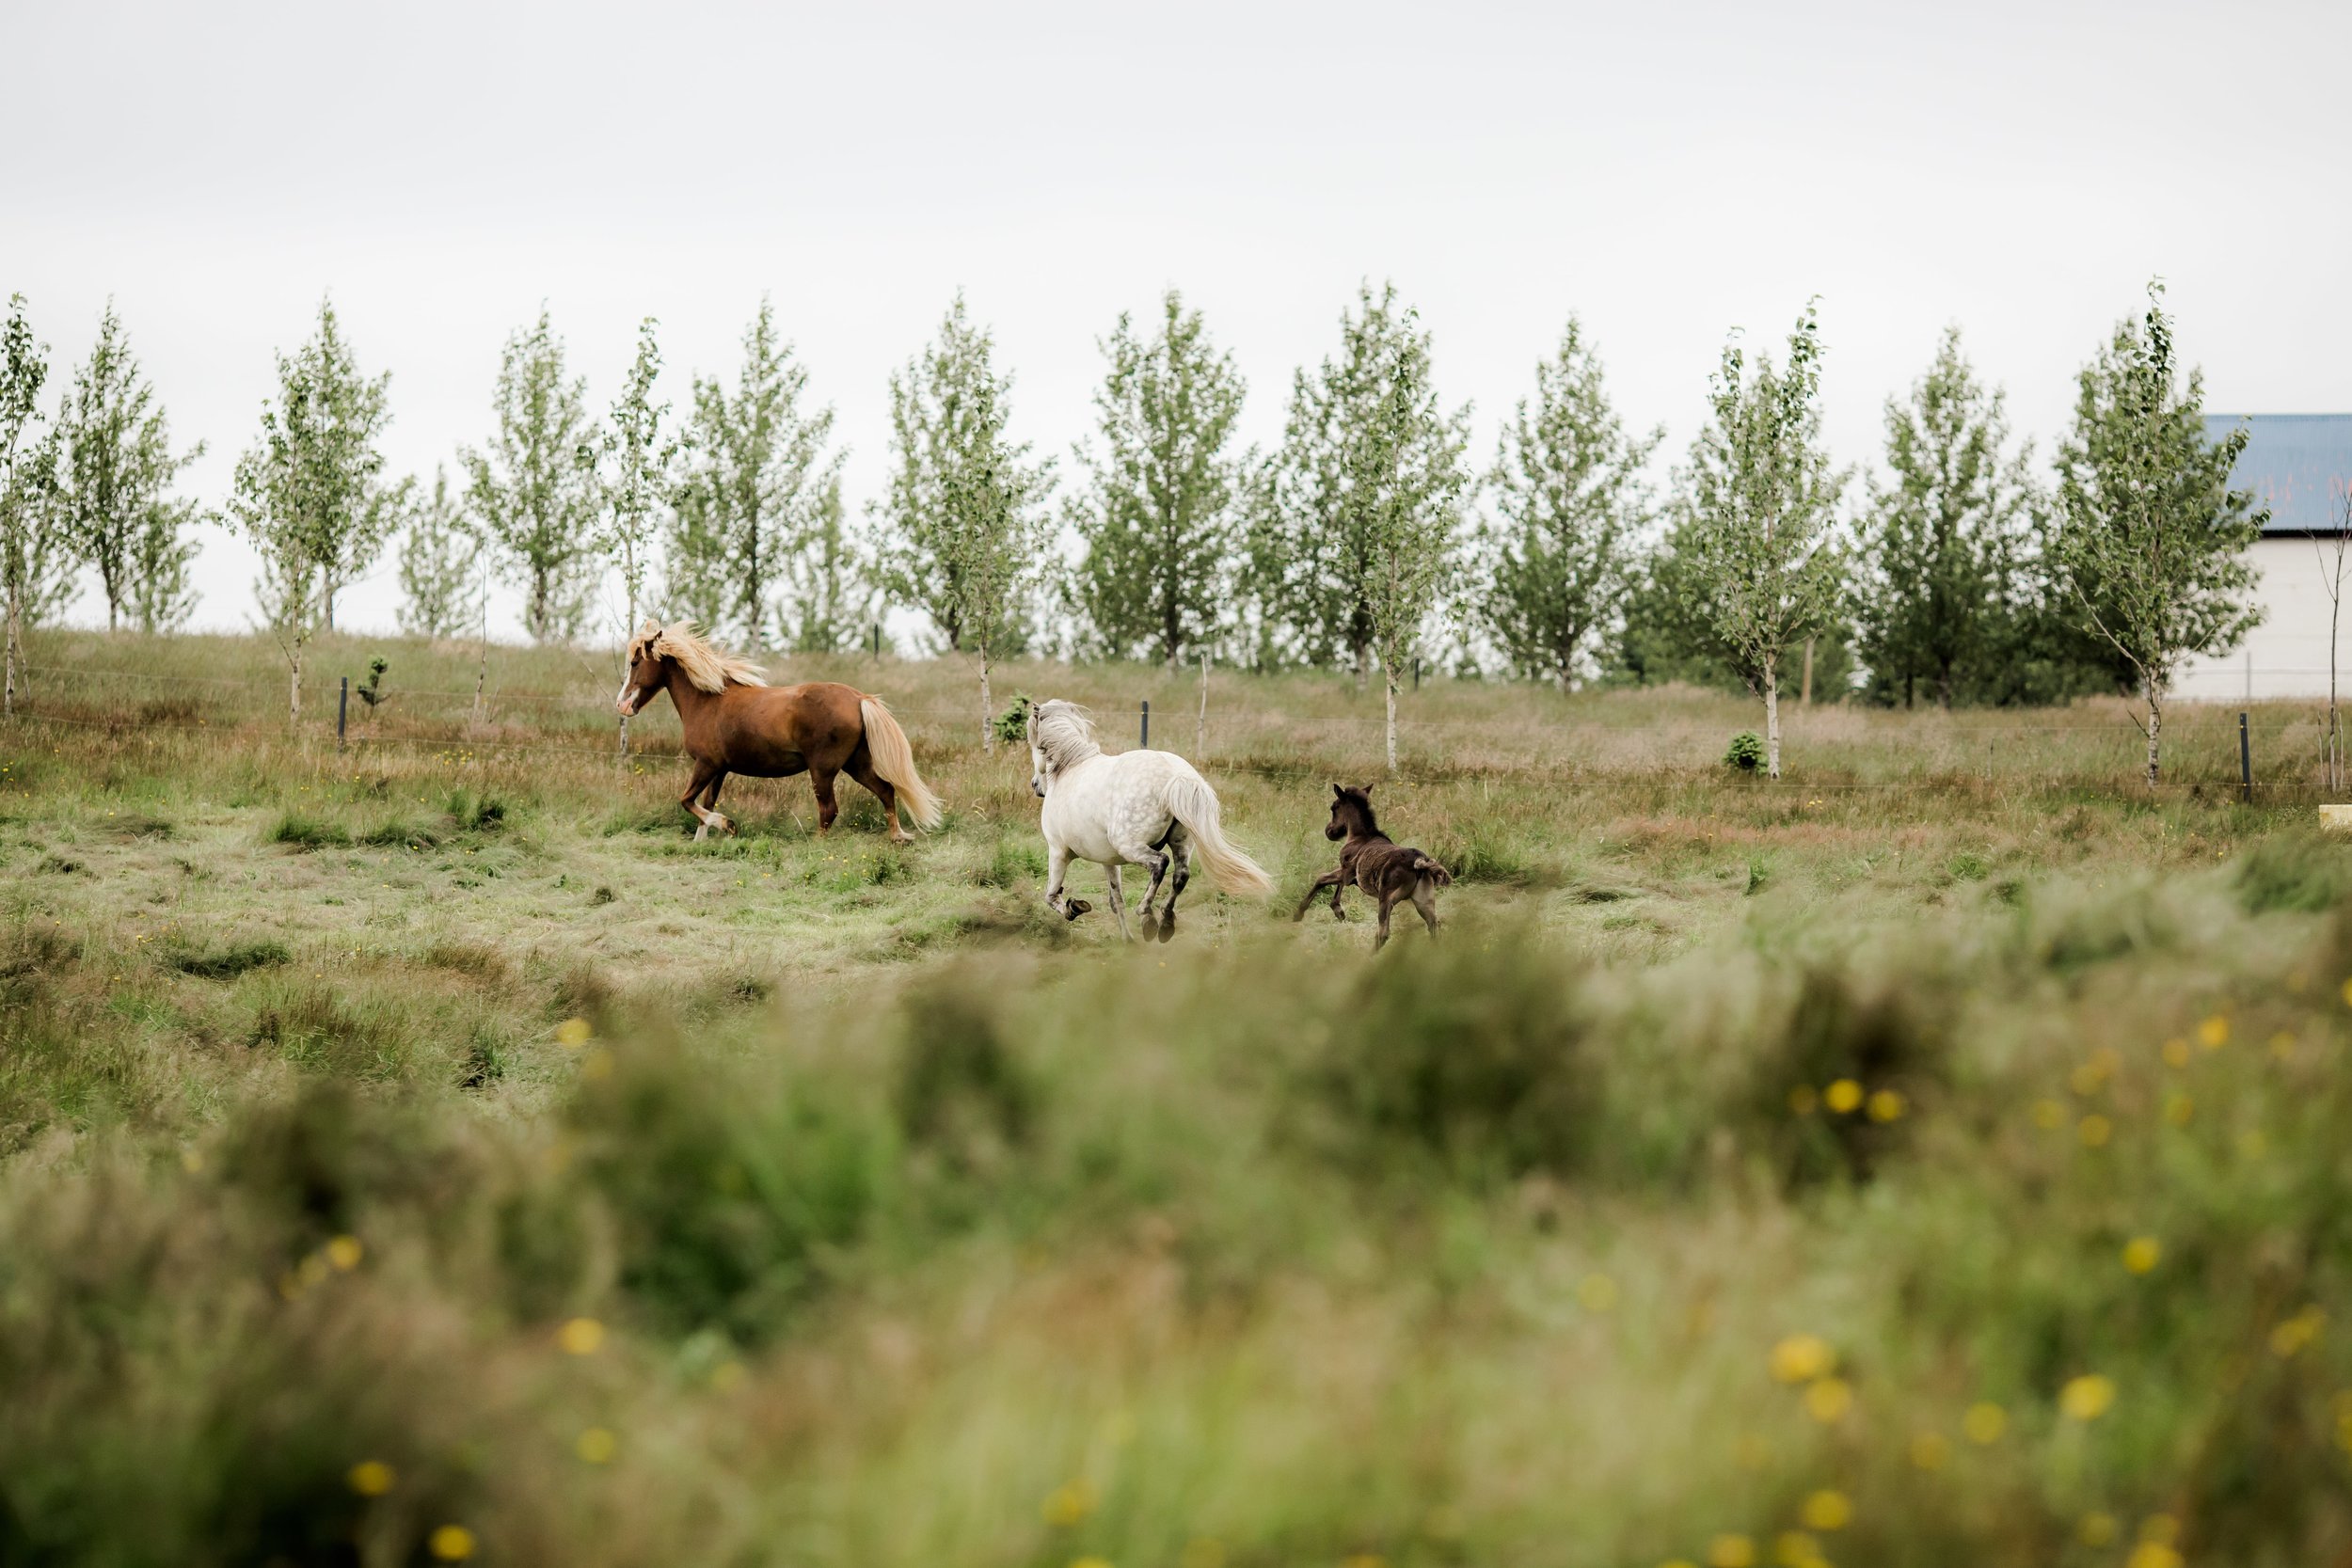 Horses in Iceland by Christina Swanson now on Cottage Hill43.jpg